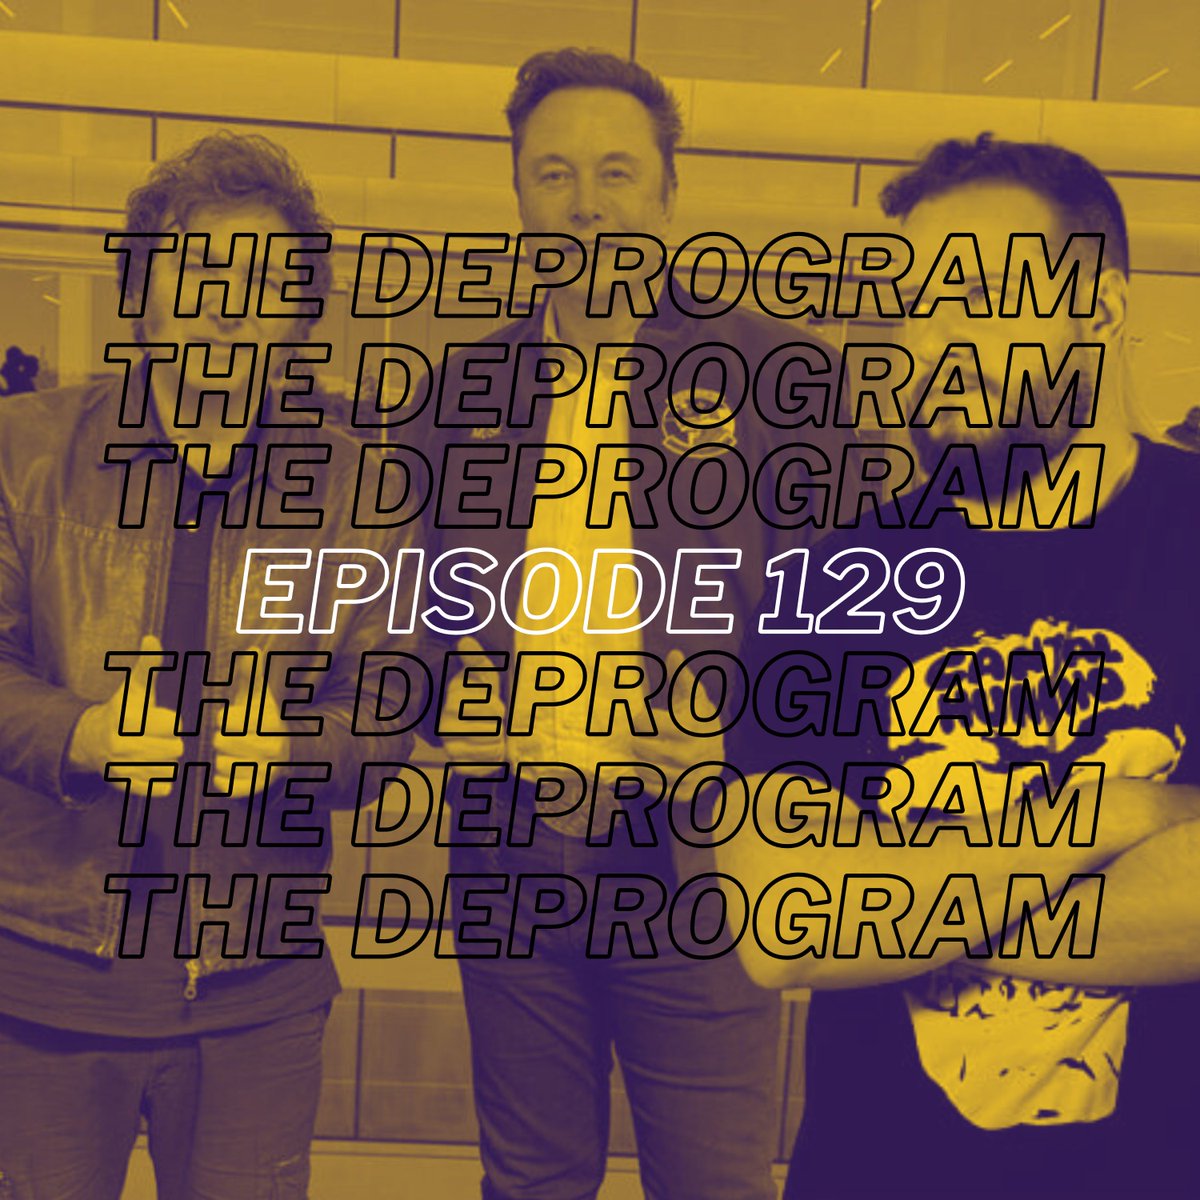 Episode 129 - The World Vs Latin America 2 (Ft. @DiegoRuzarin ) is now live EVERYWHERE - open.spotify.com/show/7tk1sTZDe… Also, Episode 130 - Alice in Liberal Land (Ft. Alice Cappelle) is now up on Patreon - patreon.com/TheDeprogram